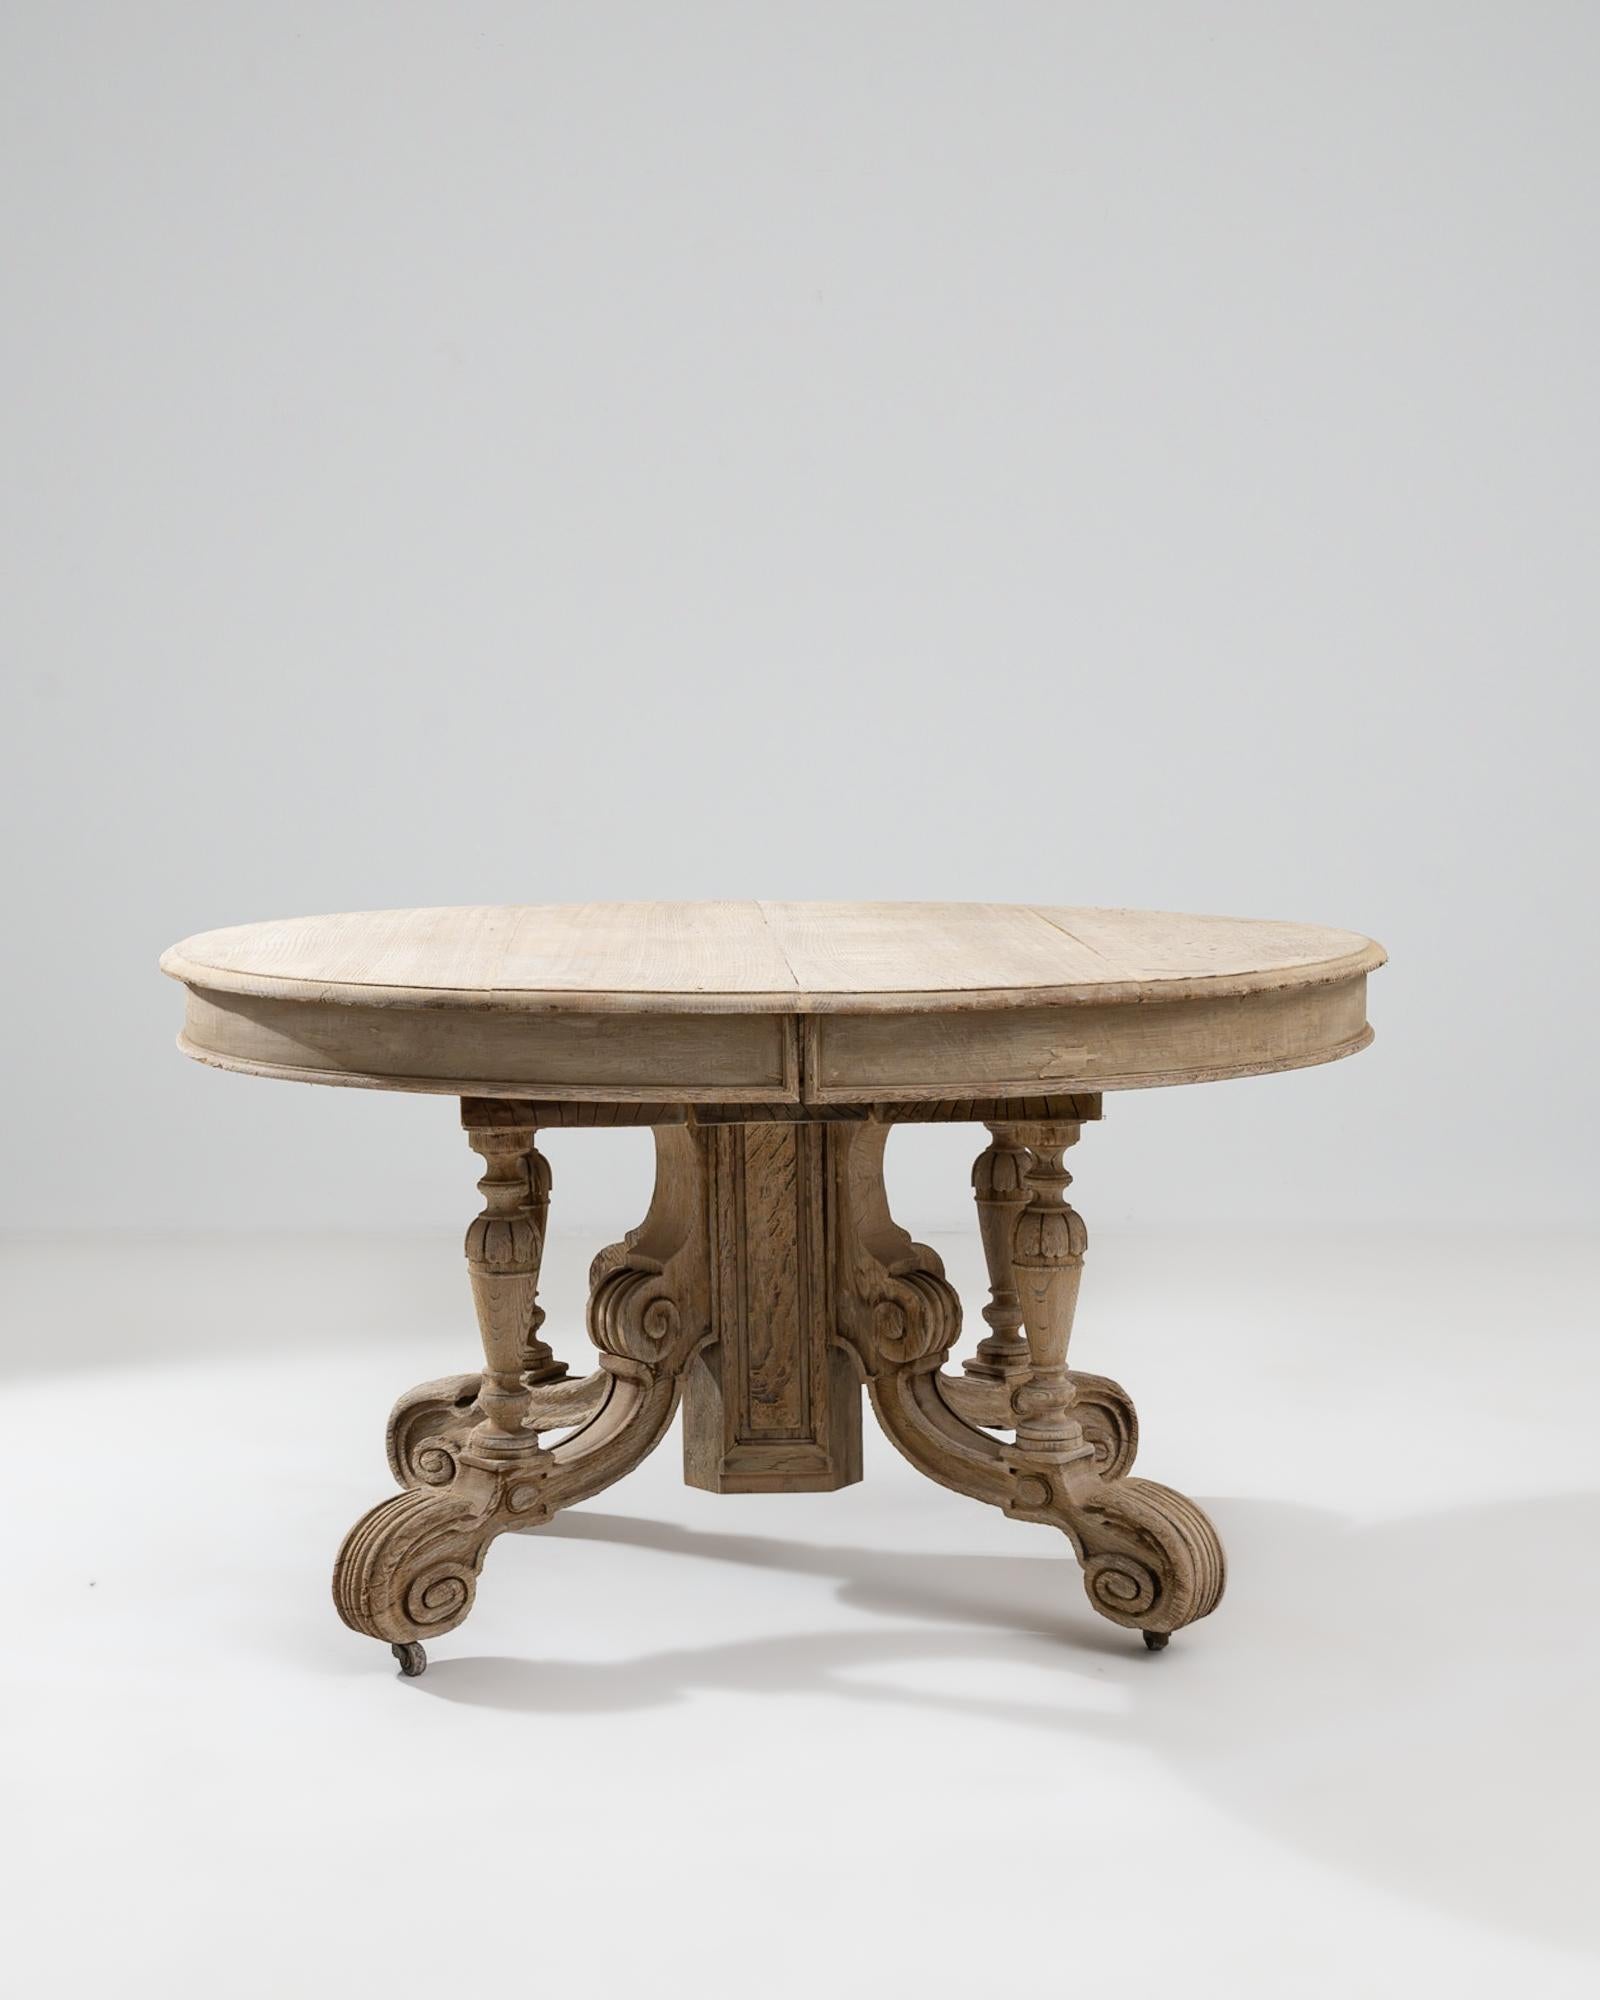 Ornate yet organic, this vintage table combines Baroque extravagance with a soothing natural finish. Hand-made in France at the turn of the century, a simple circular tabletop rests atop an elaborate carved base. The legs are composed of sinuous